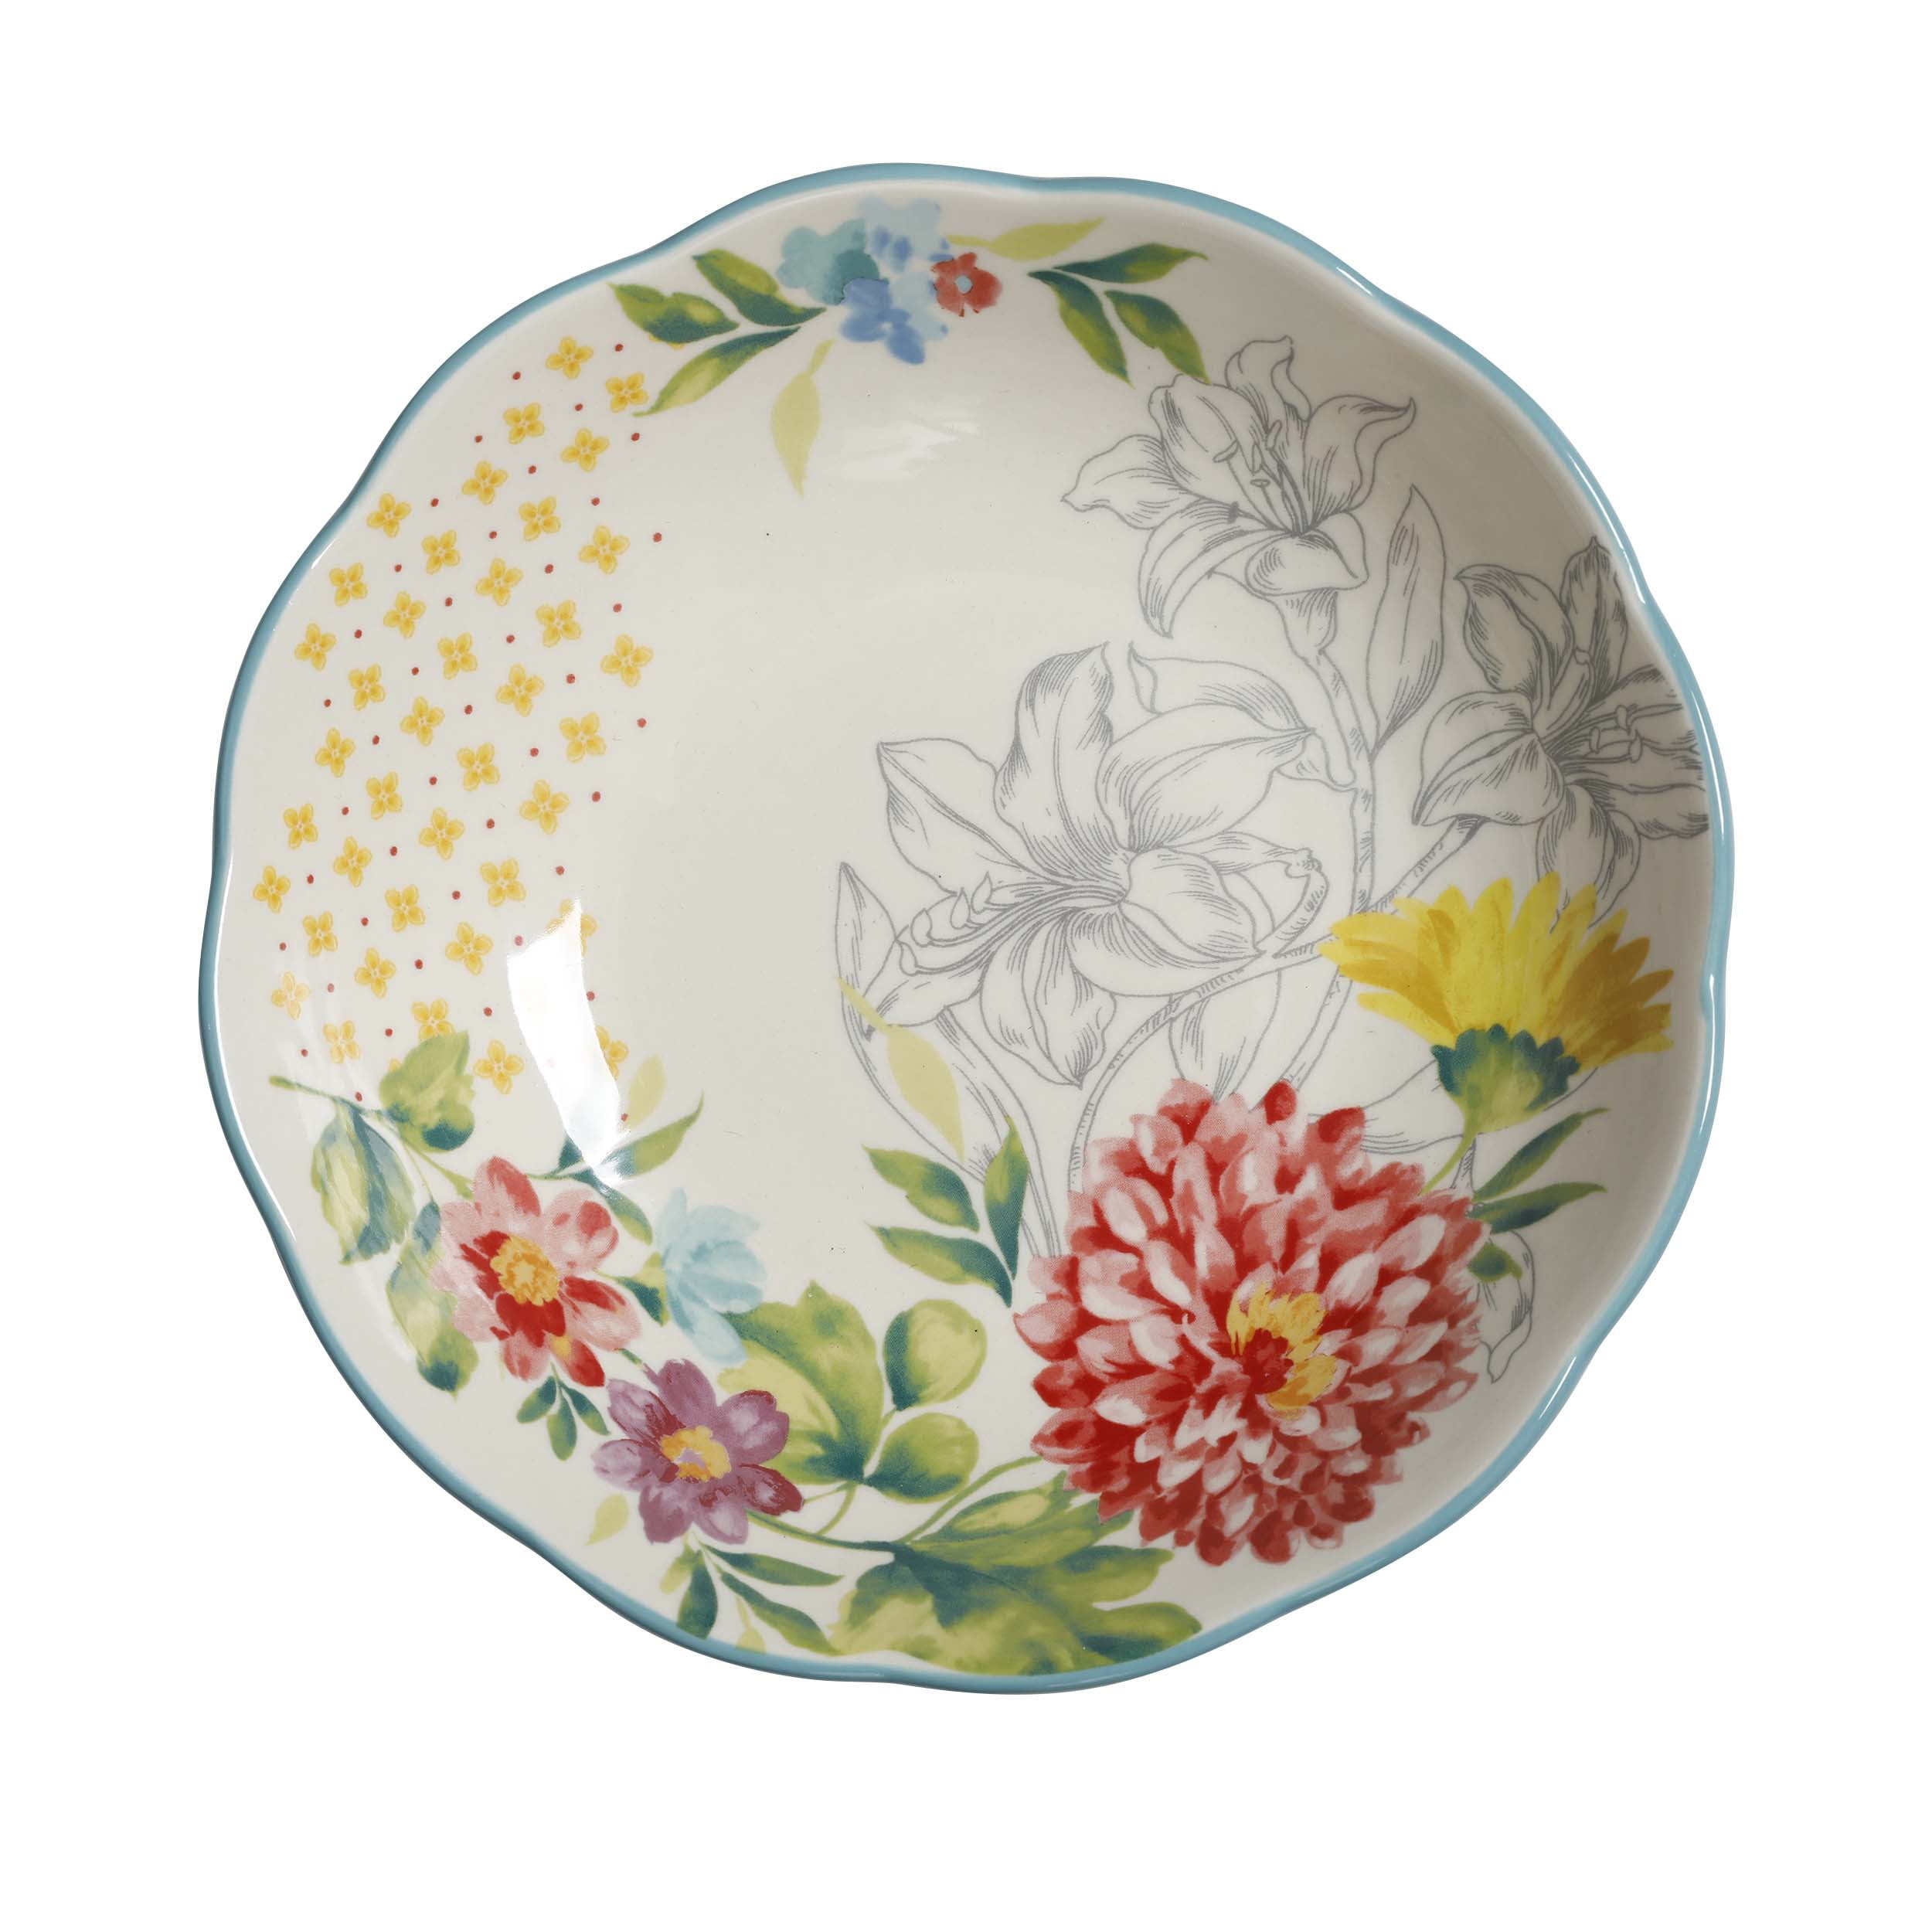 The Pioneer Woman Floral Medley 9-Inch Ceramic Pie Plate *FREE SHIPPING*